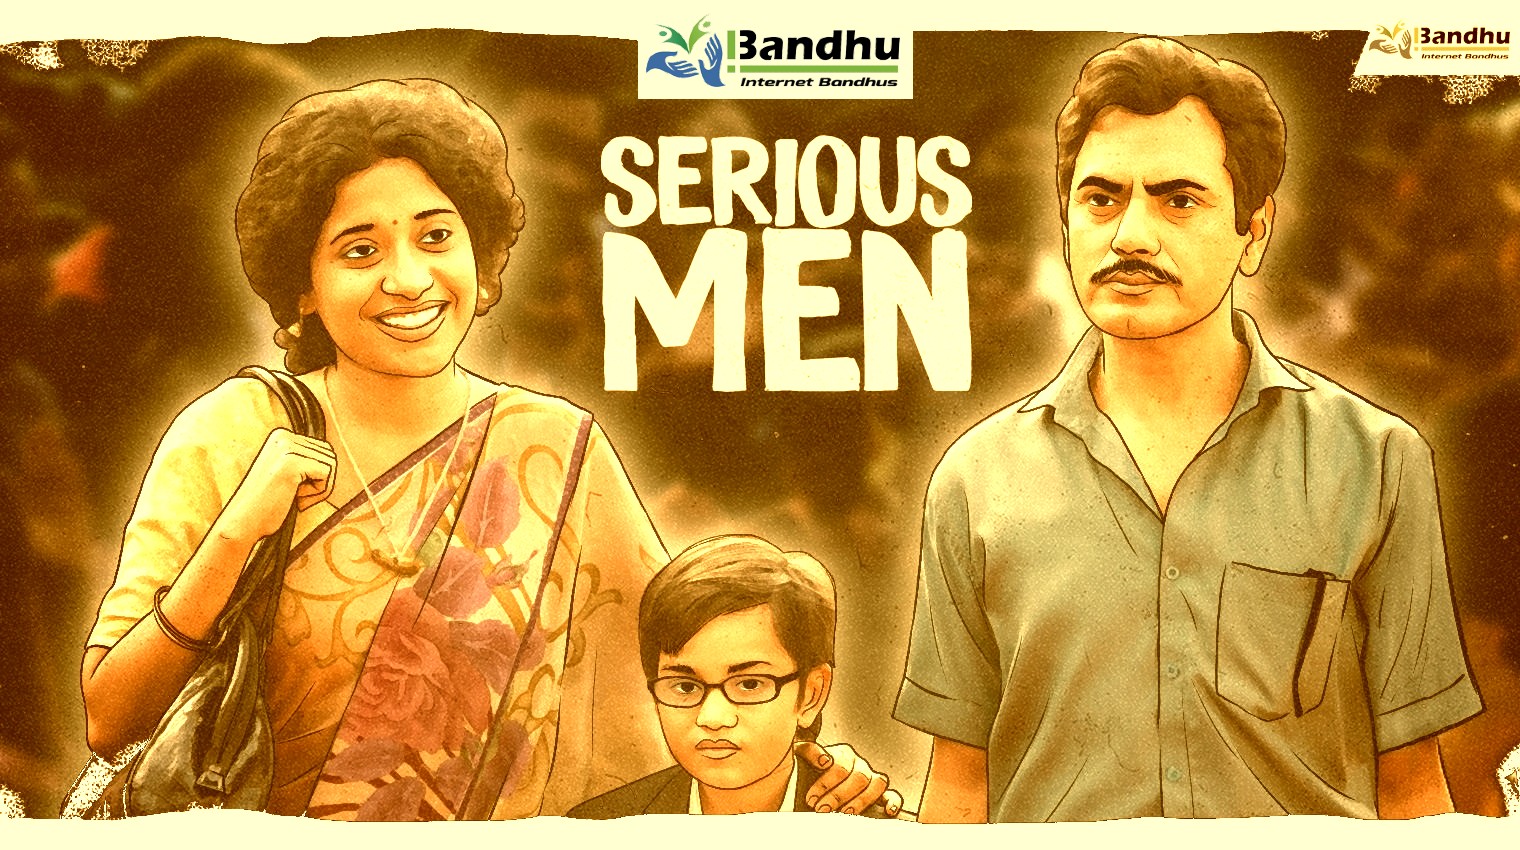 Serious Men Review by K2 - Ibandhu